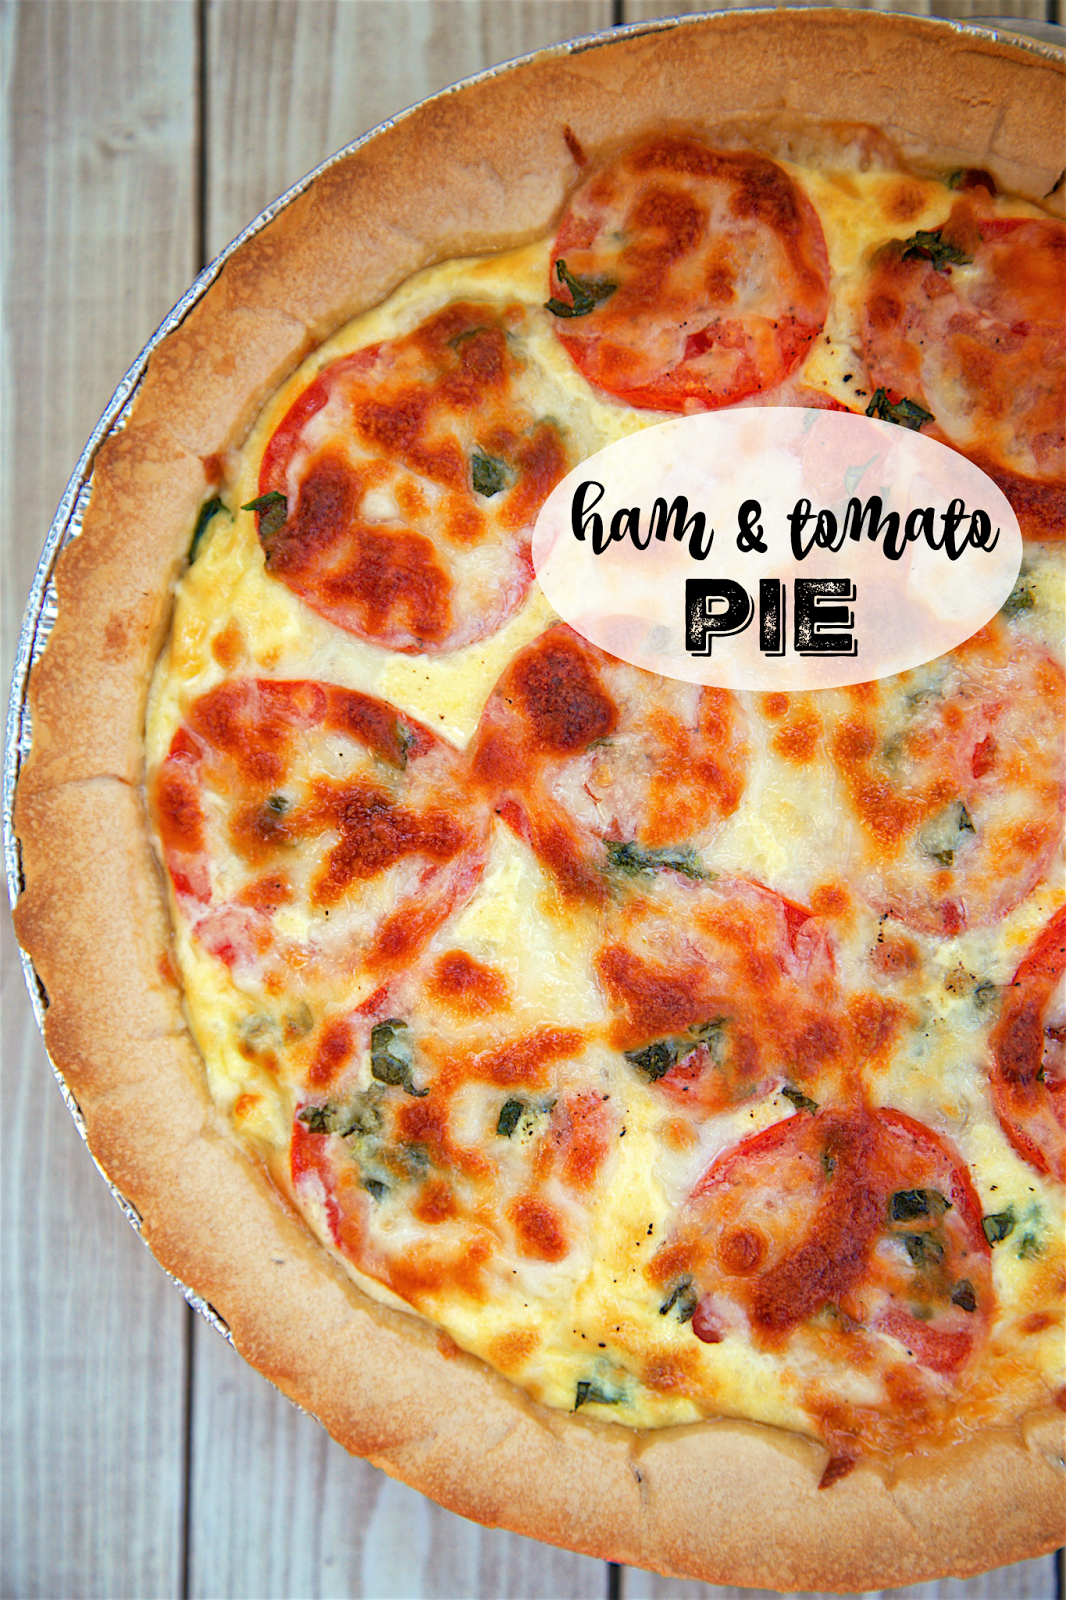 Ham and Tomato Pie - Spring and Summer on a plate! Ham, green onions, fresh basil, dijon, egg, half-and-half, mozzarella and fresh ripe tomatoes. There is never any left! Everyone asks for the recipe. SO simple and SOOO delicious!!